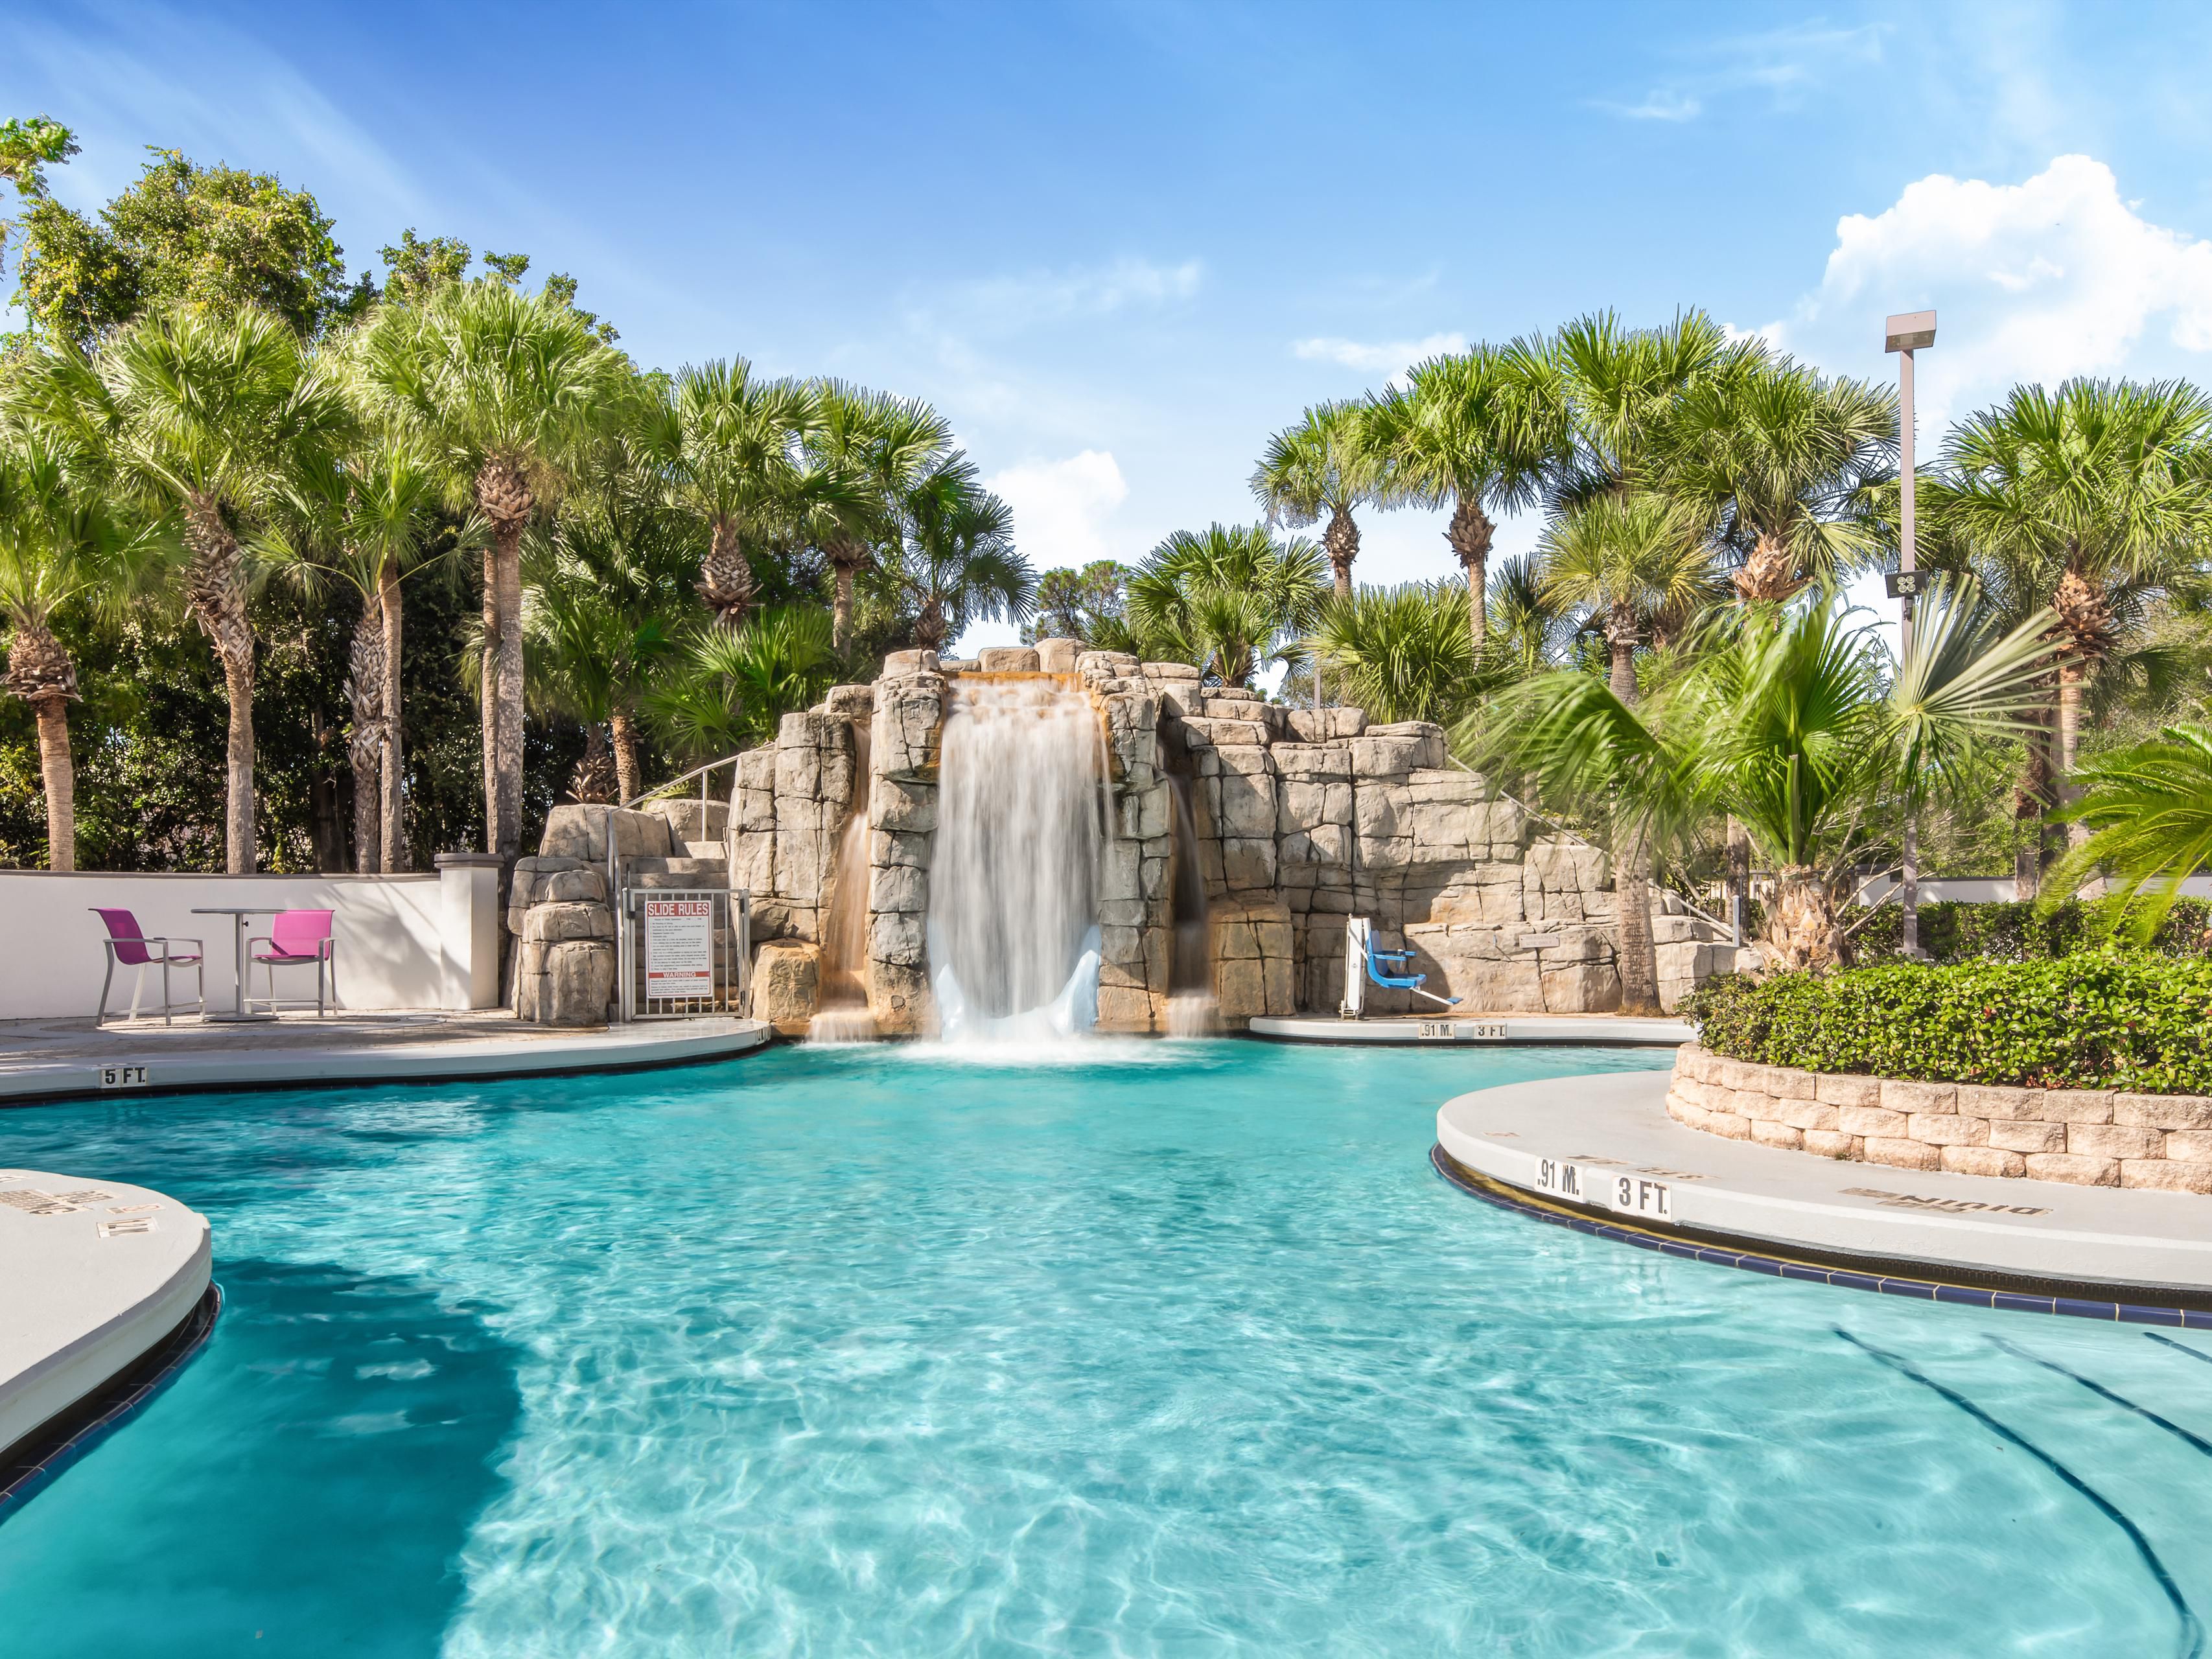 Enjoy the Florida sunshine at our inviting outdoor pool with beautiful palm trees and the tranquil sounds of a cascading waterfall. While you relax by the poolside, the kids can have a blast on the thrilling 50-foot waterslide. It's the perfect recipe for a blissful Orlando vacation.